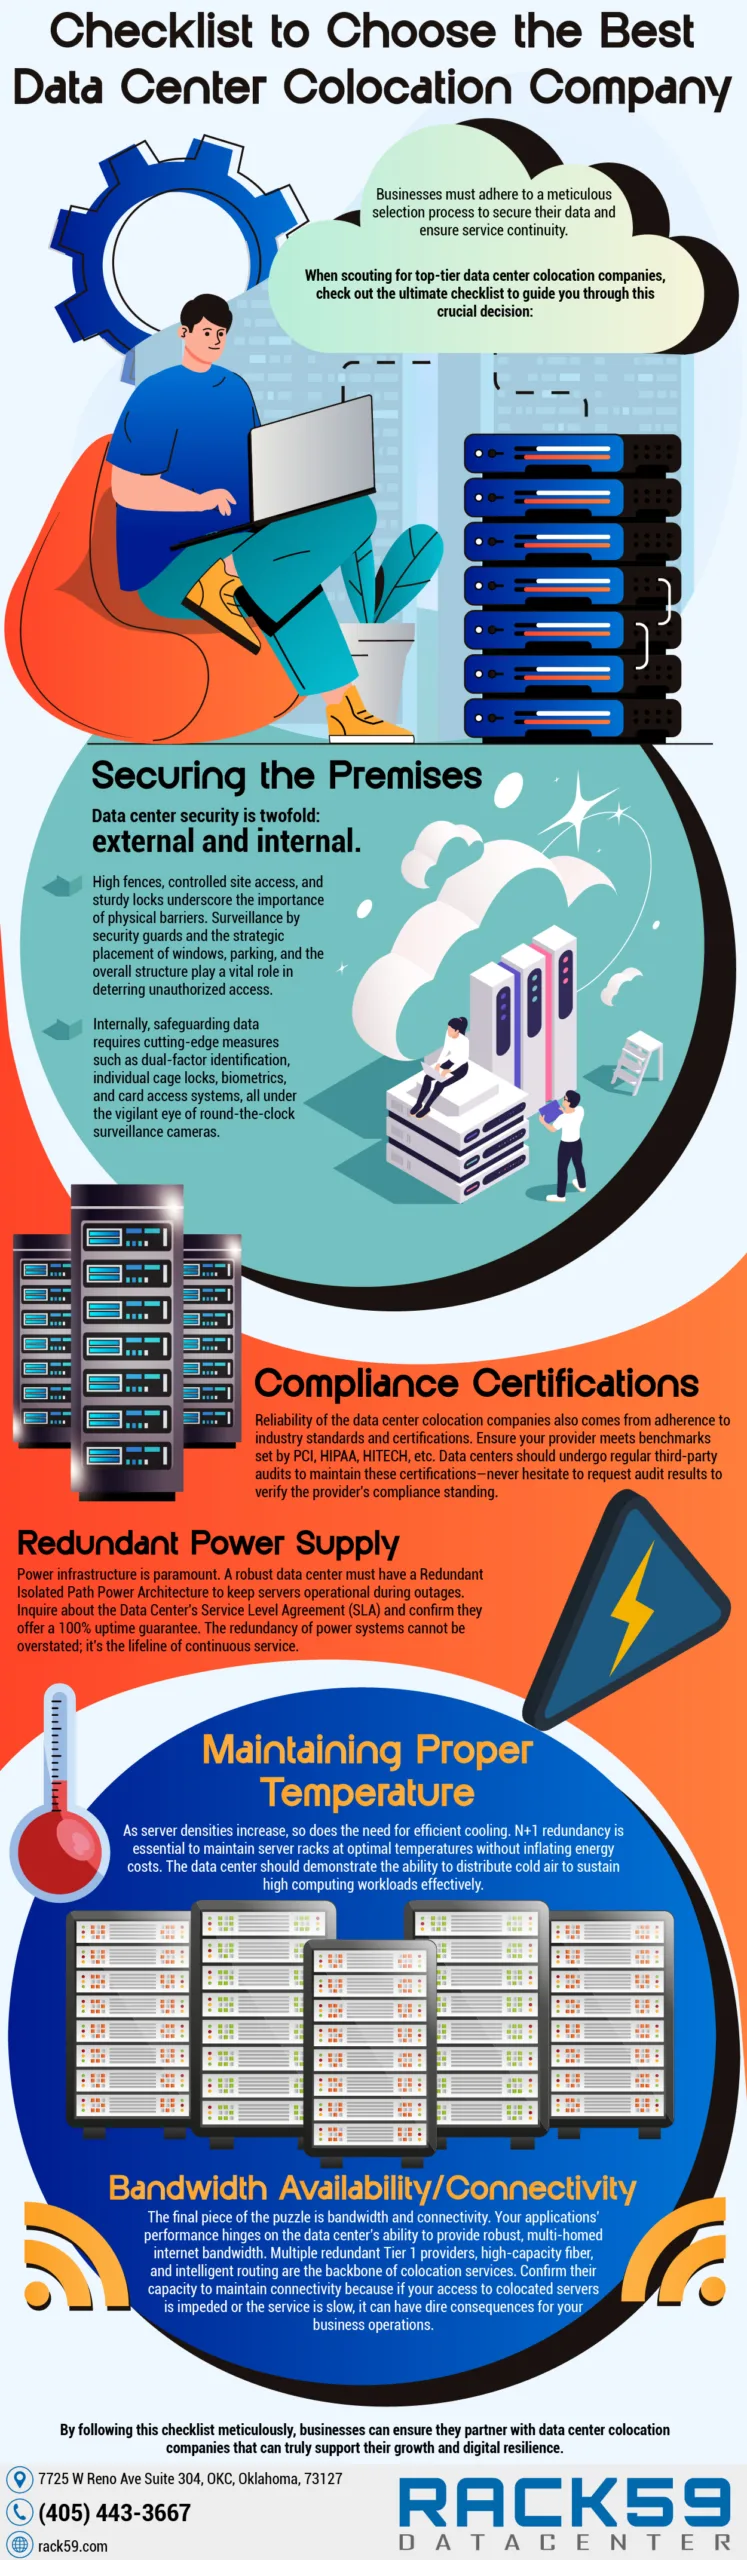 Checklist to Choose the Best Data Center Colocation Company